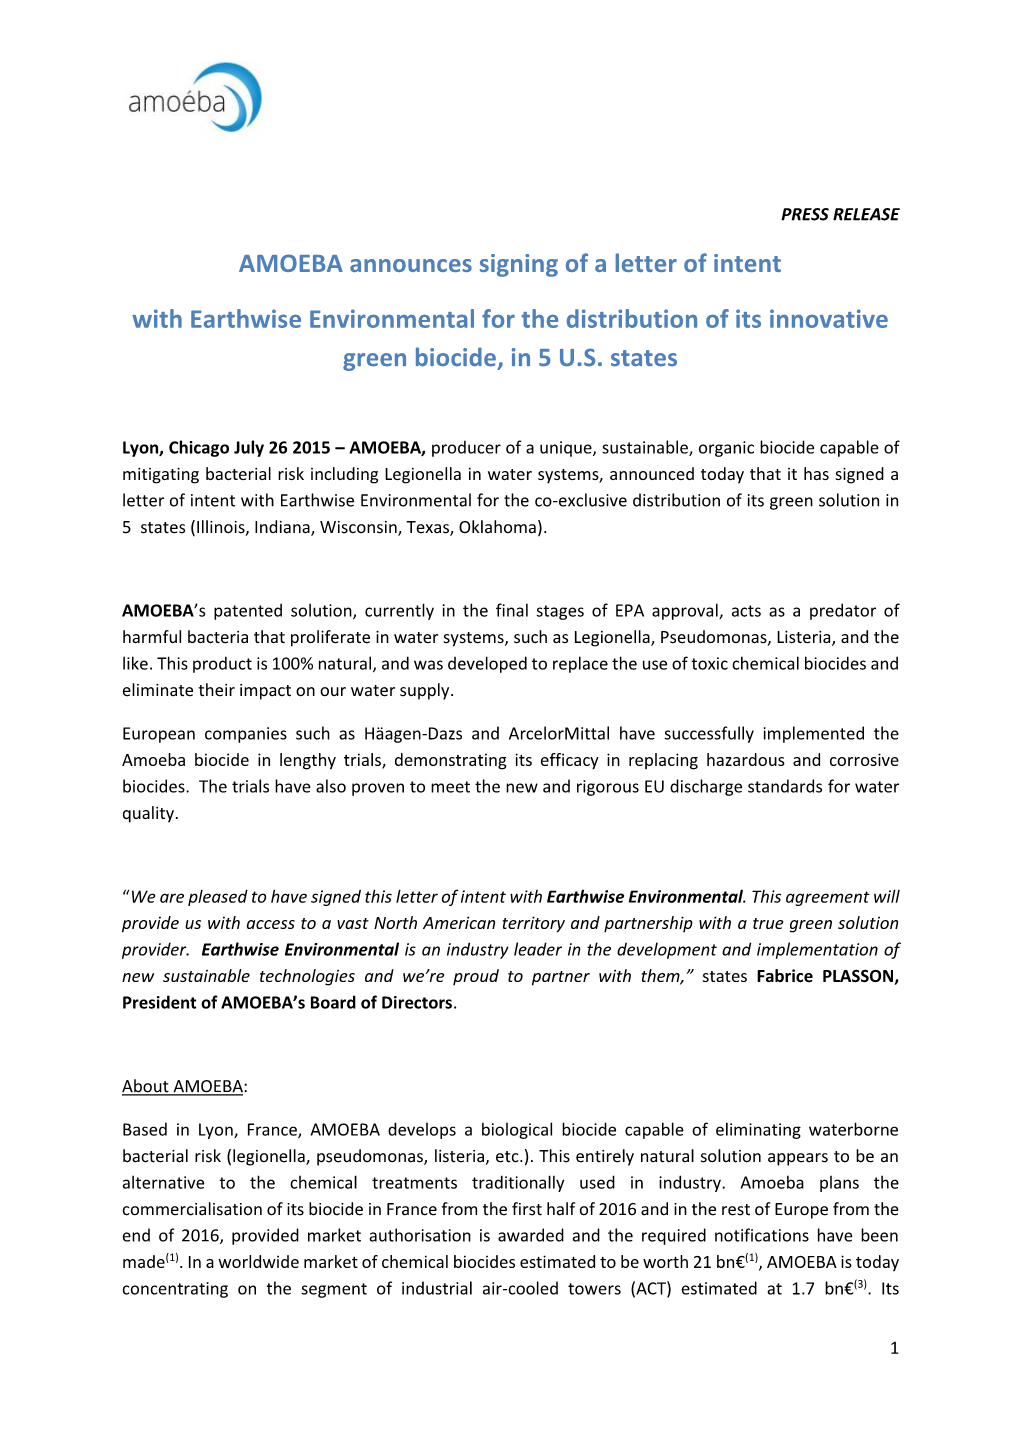 July 30, 2015 Amoeba Announces Letter of Intent with Earthwise